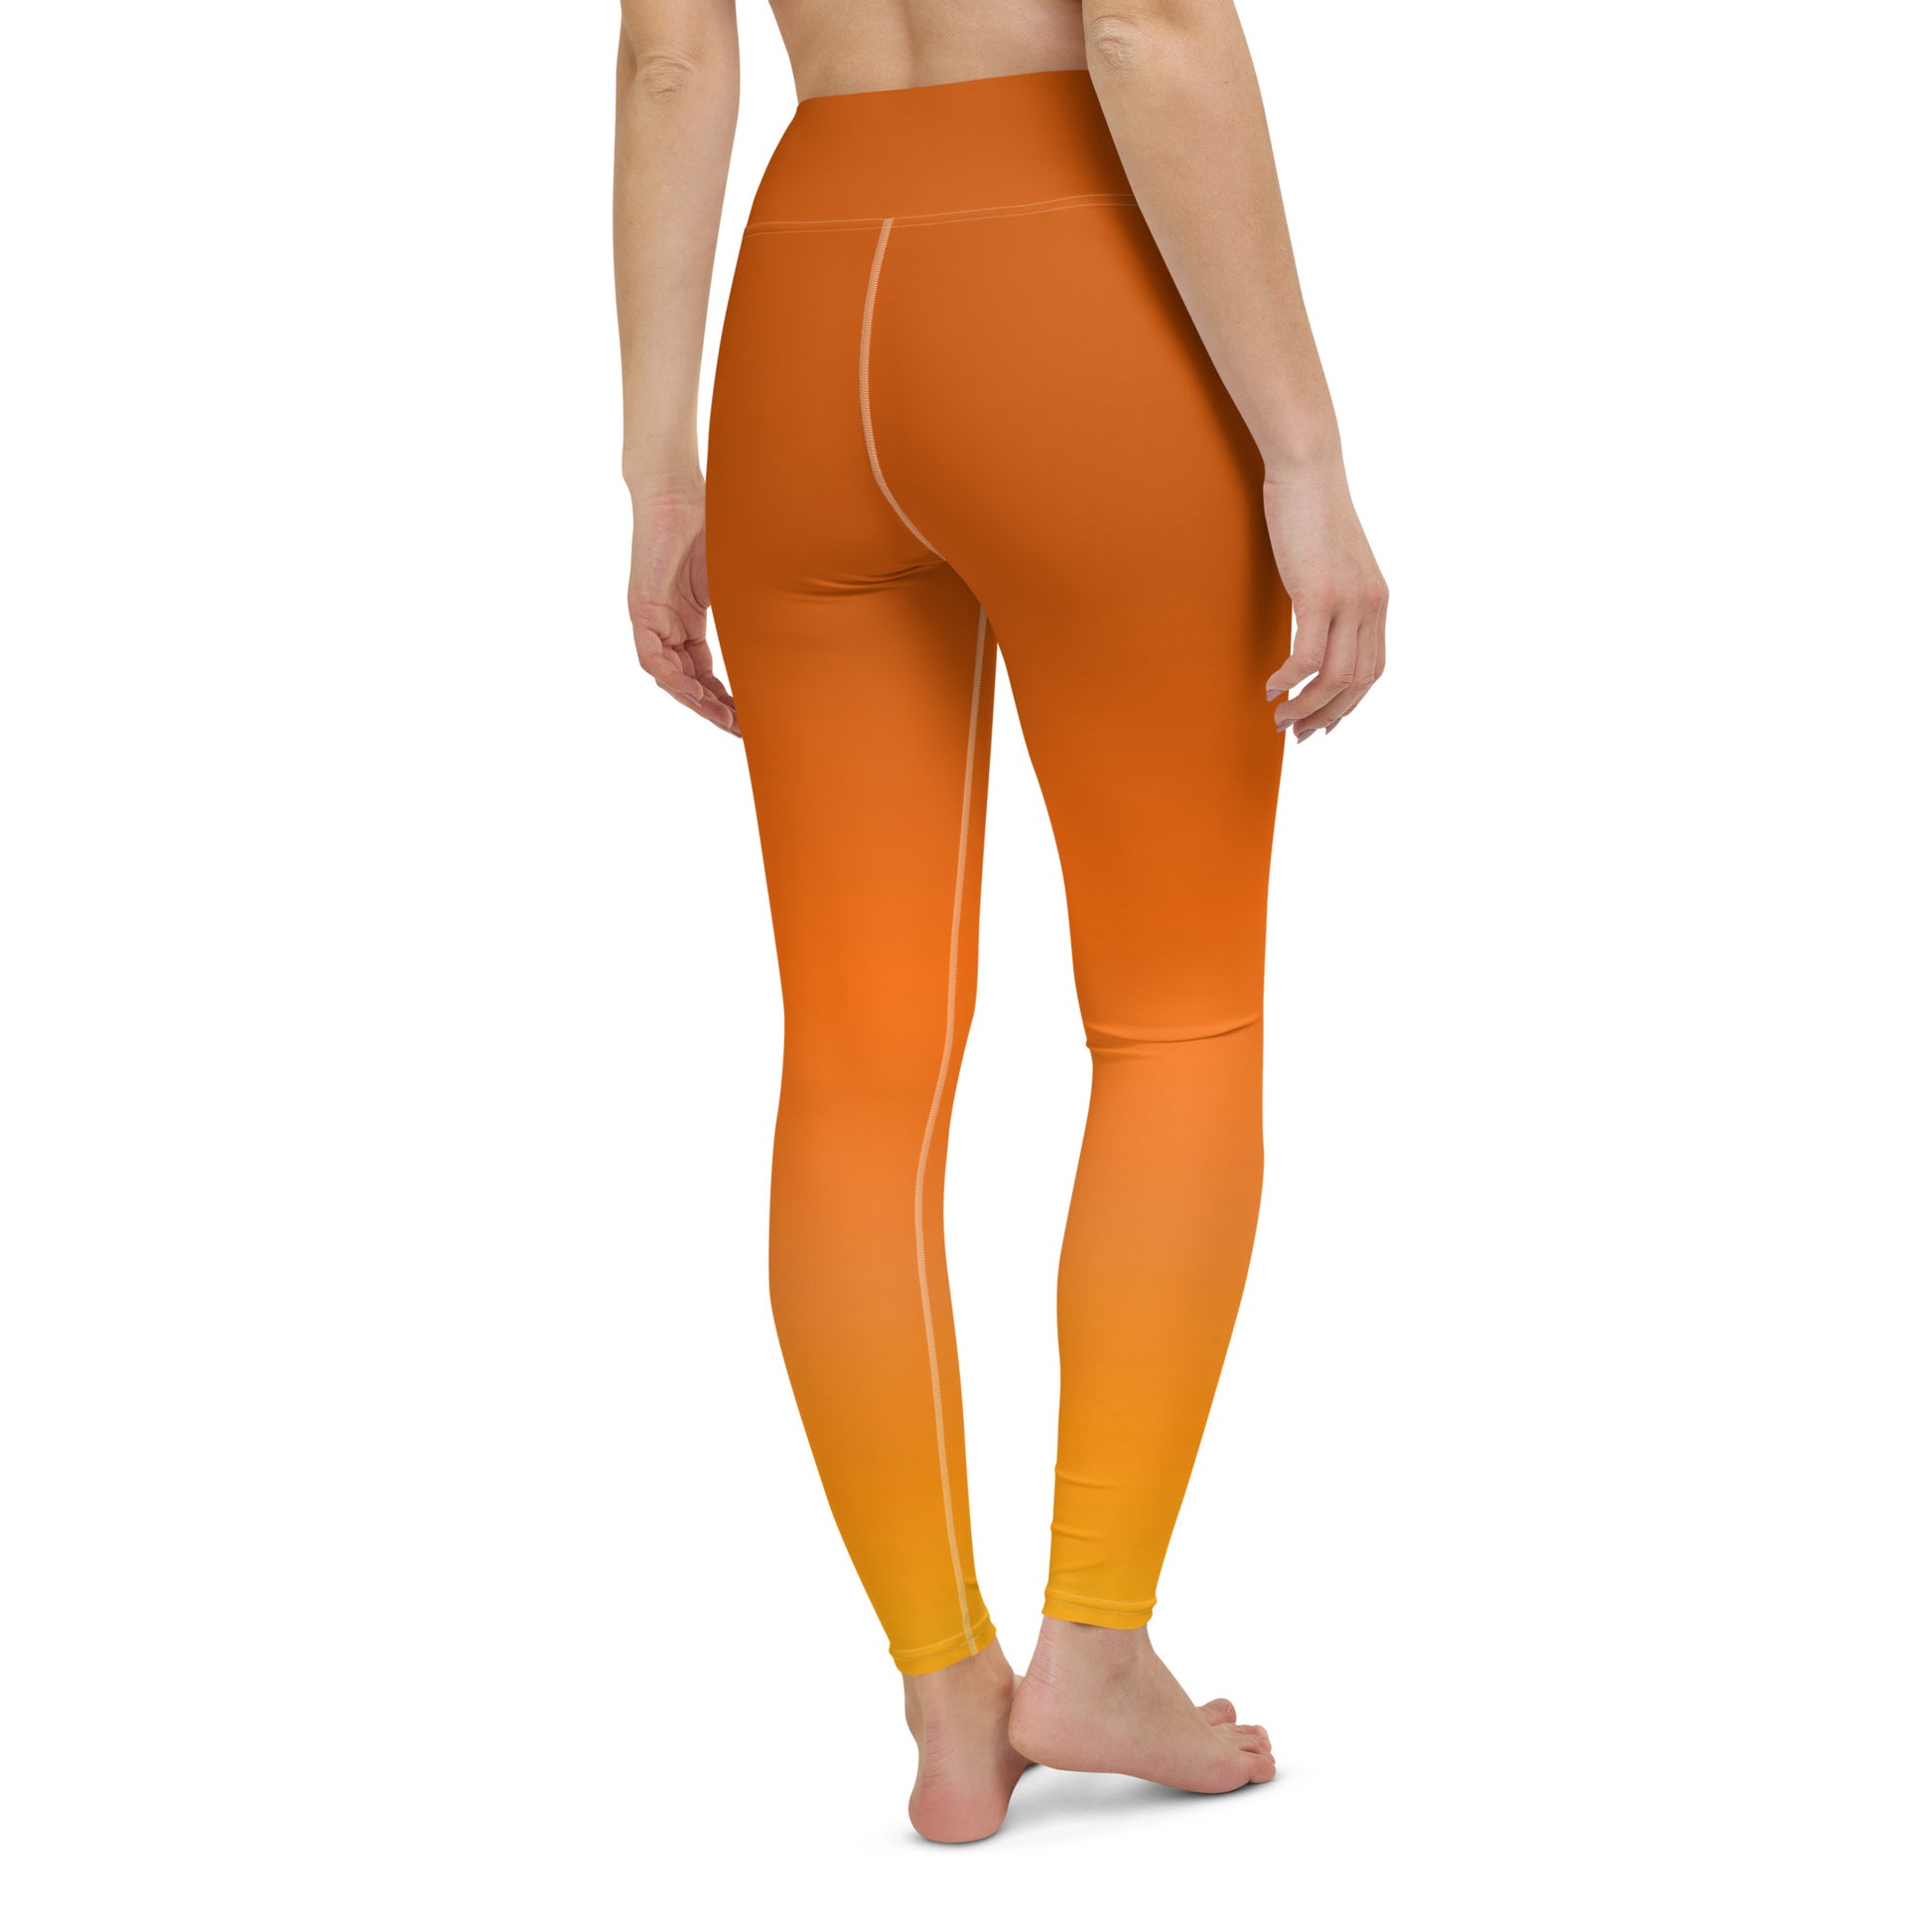 Burnt Orange Yoga Leggings Women, Ombre Tie Dye Fall Autumn High Waisted  Pants Cute Printed Workout Gym Designer Tights 